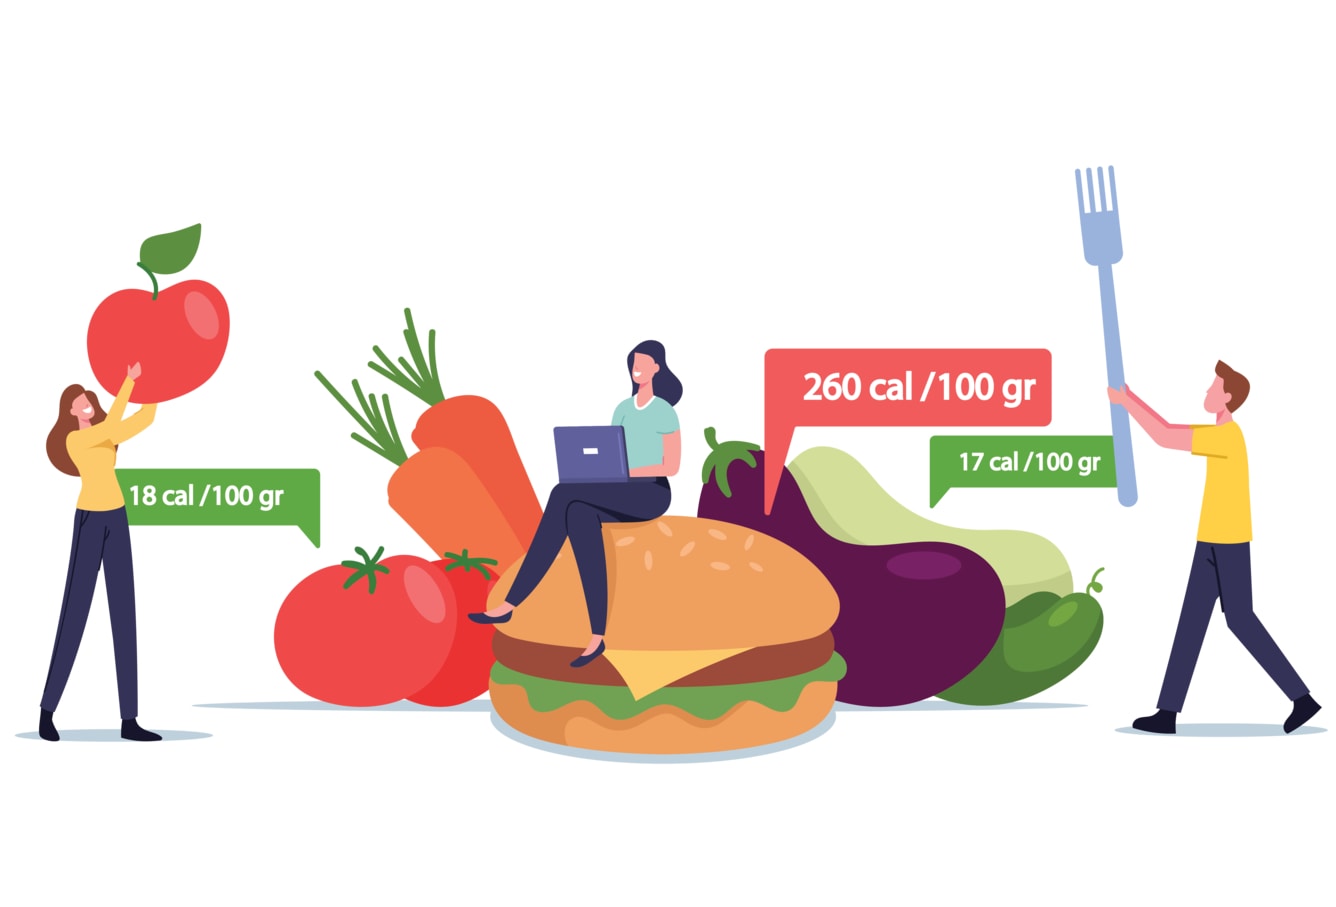 Illustration of different foods and its calories: tomato, carrots, burger, aubergine, cucumber.